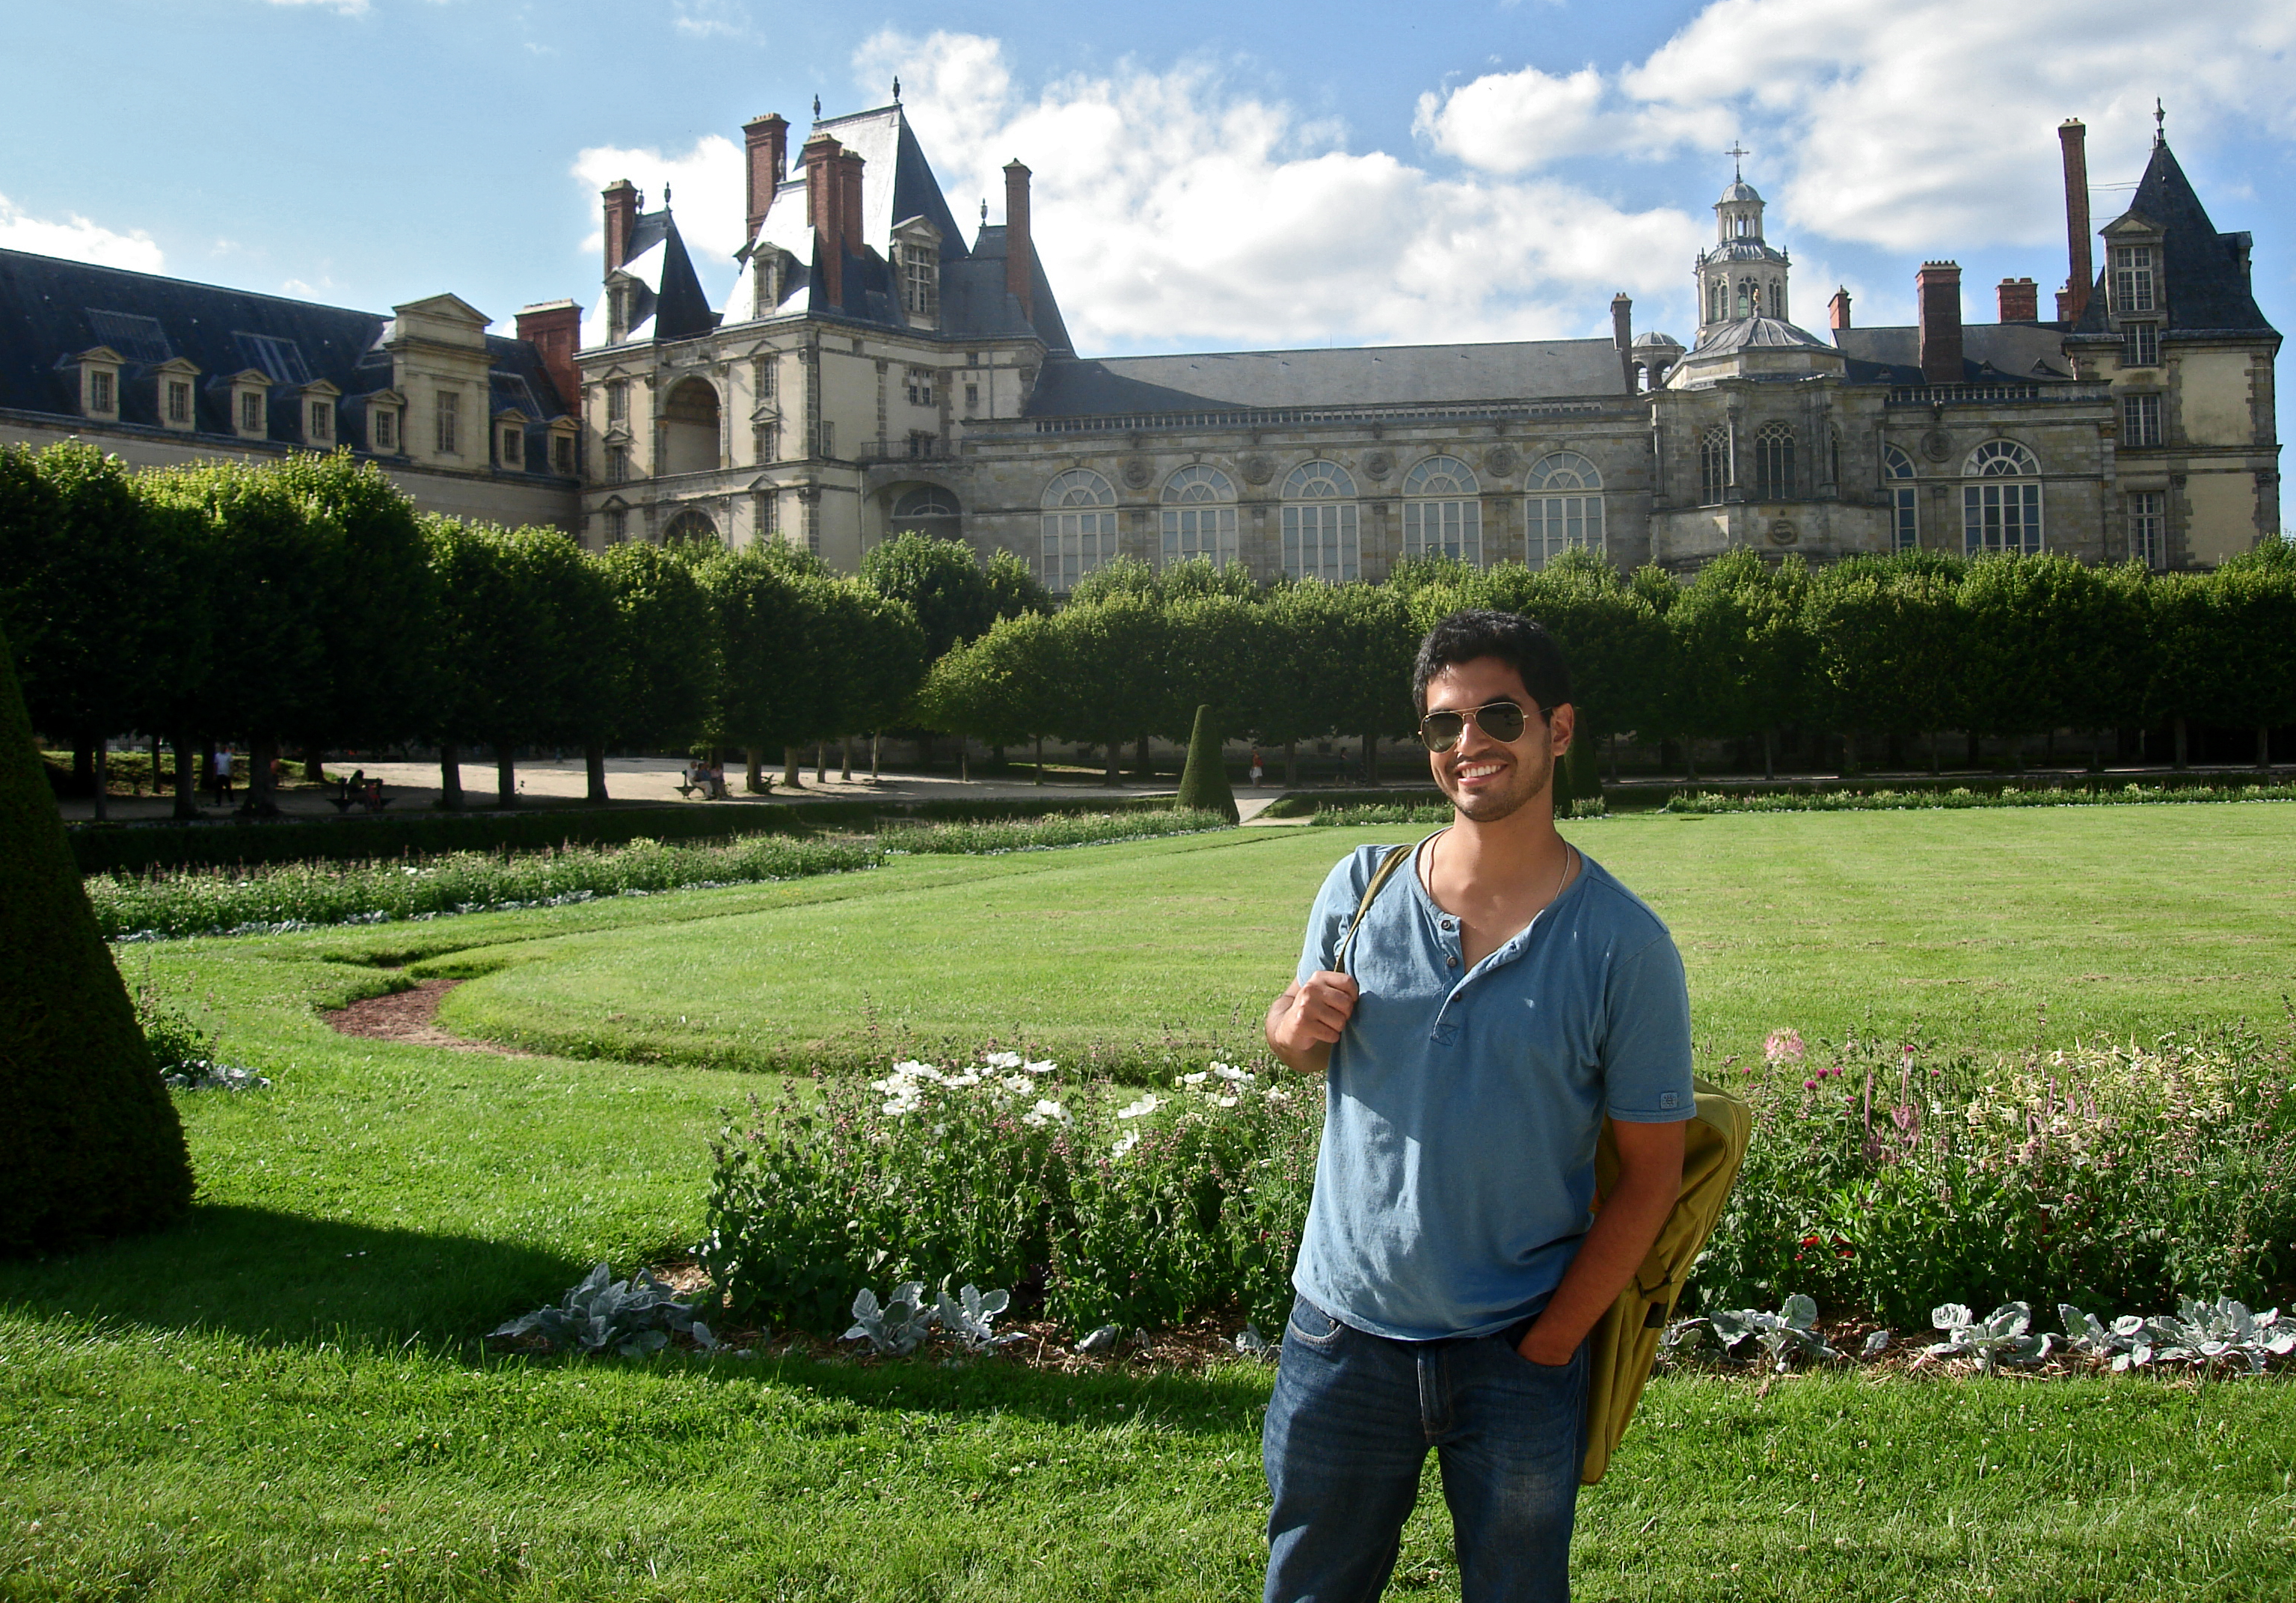 Deigo Arias-Caballero standing with the large chateau of Fontainebleau in the background.